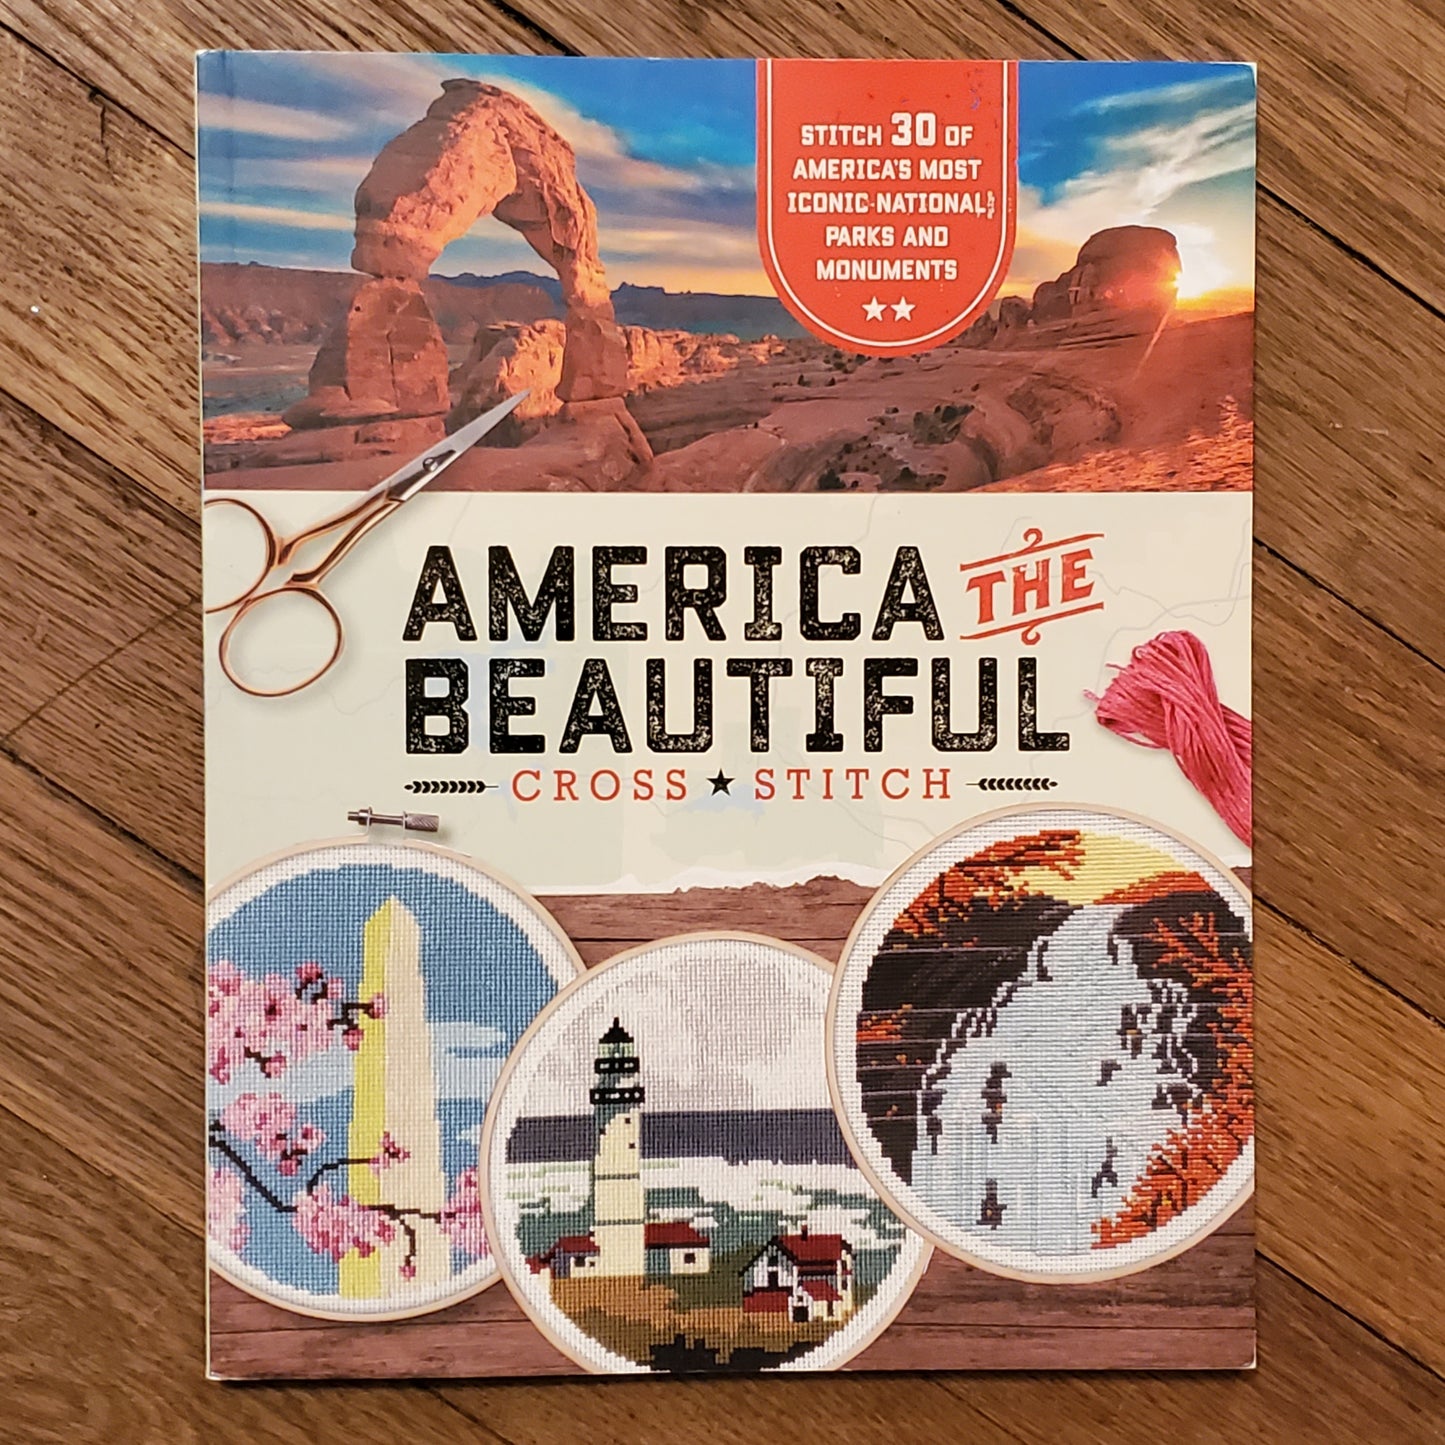 GB America the Beautiful Cross Stitch: Stitch 30 of America's Most Iconic National Parks and Monuments